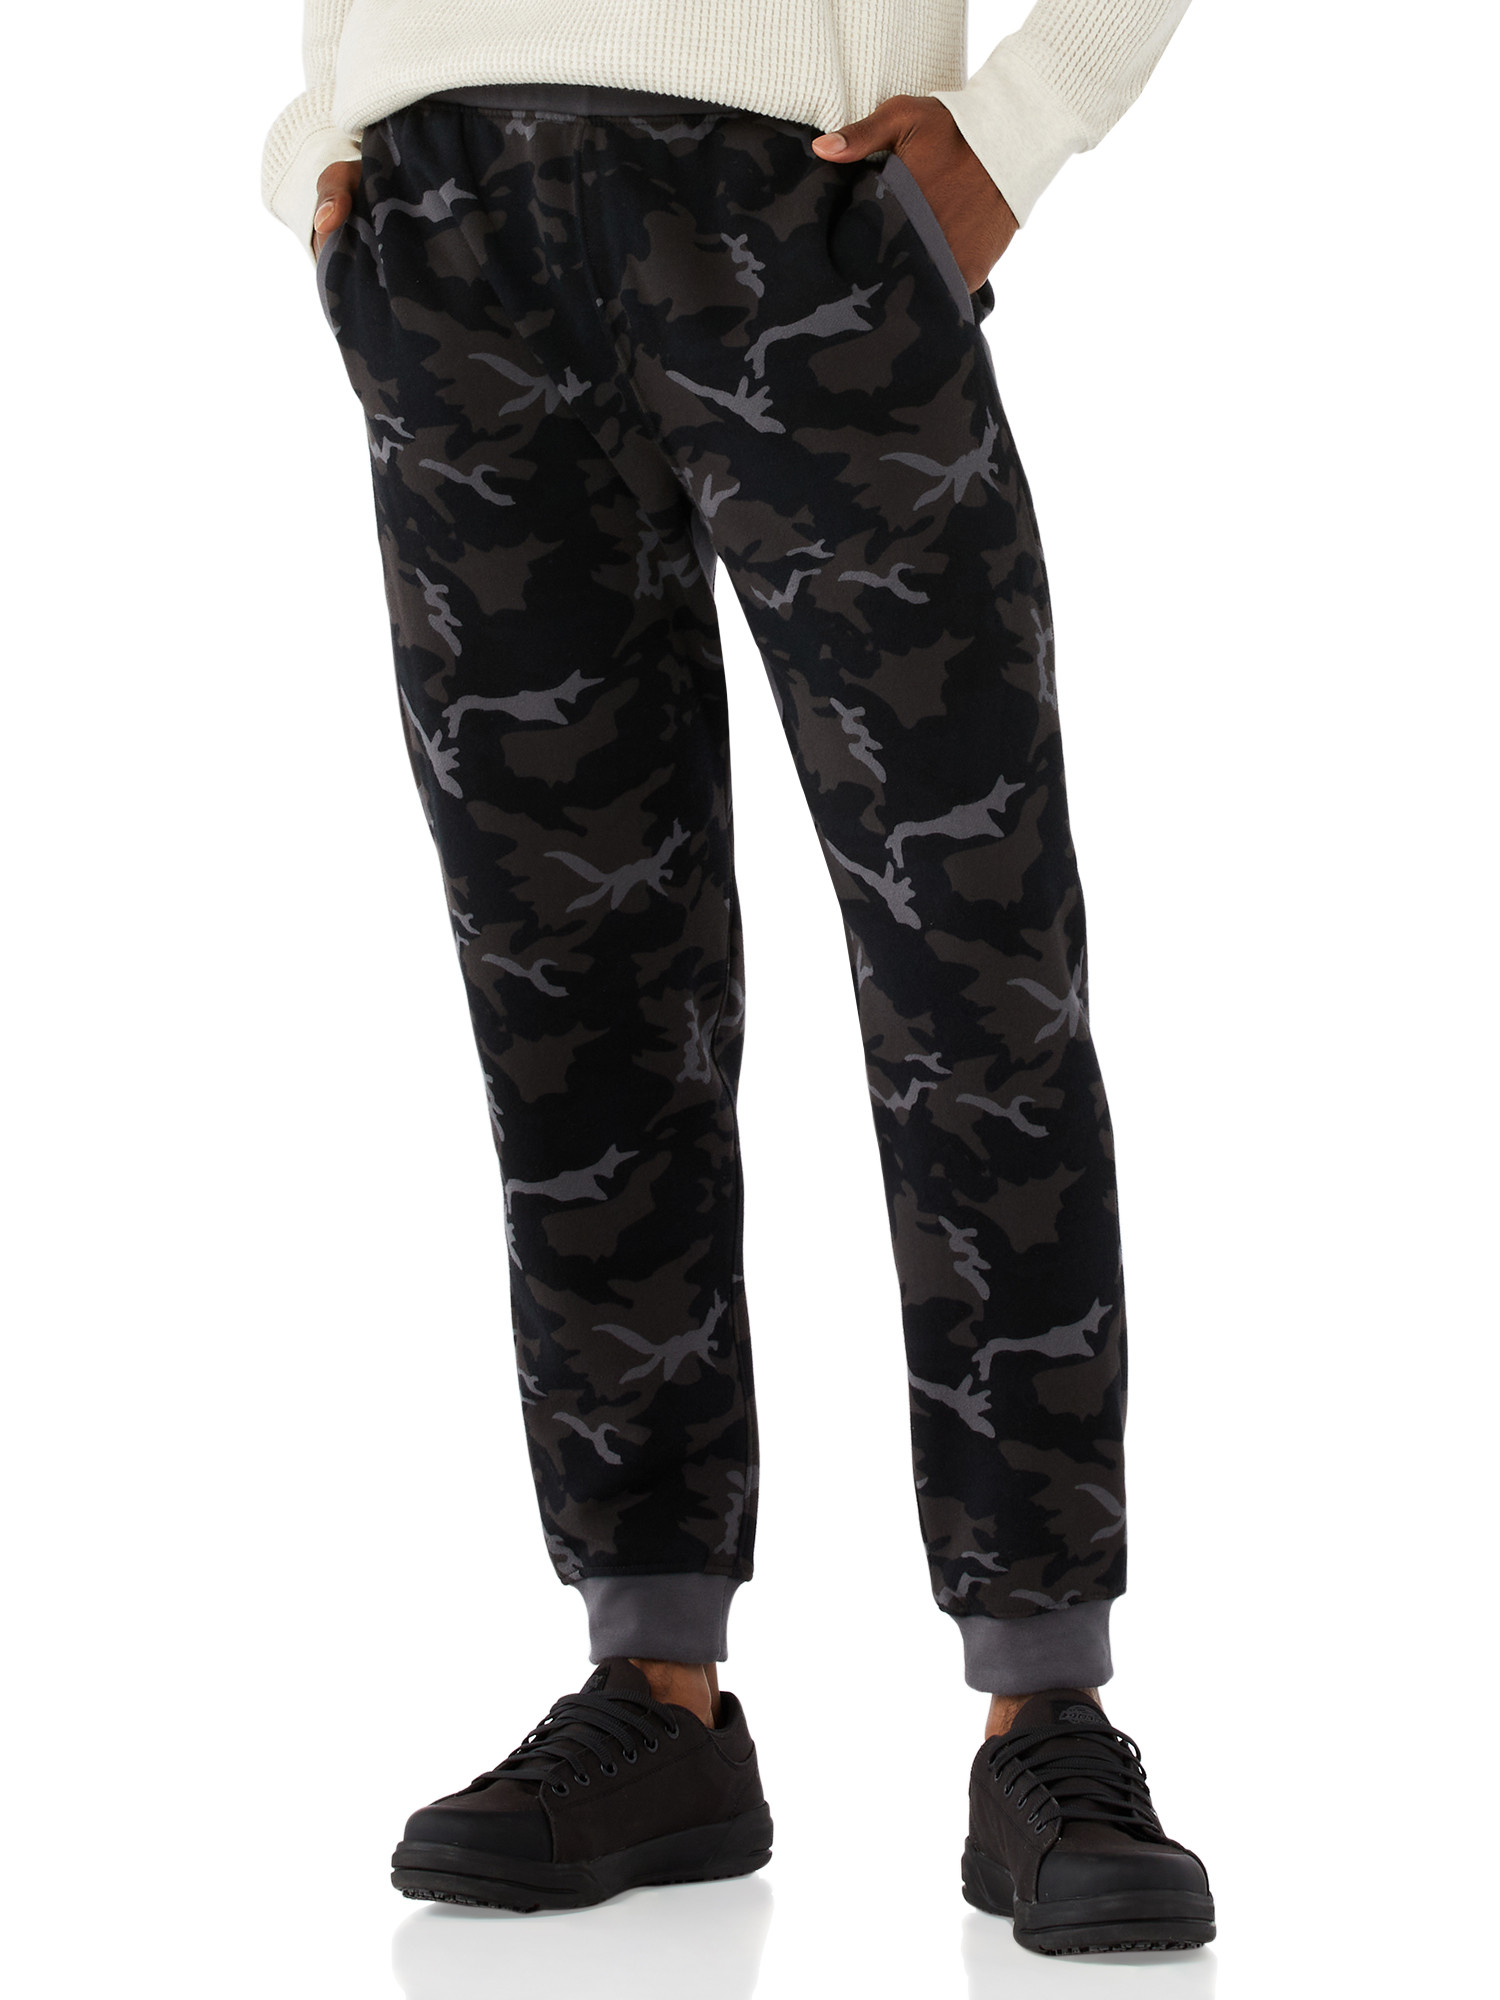 Free Assembly Men's Everyday Fleece Pant - Jogger - image 1 of 6